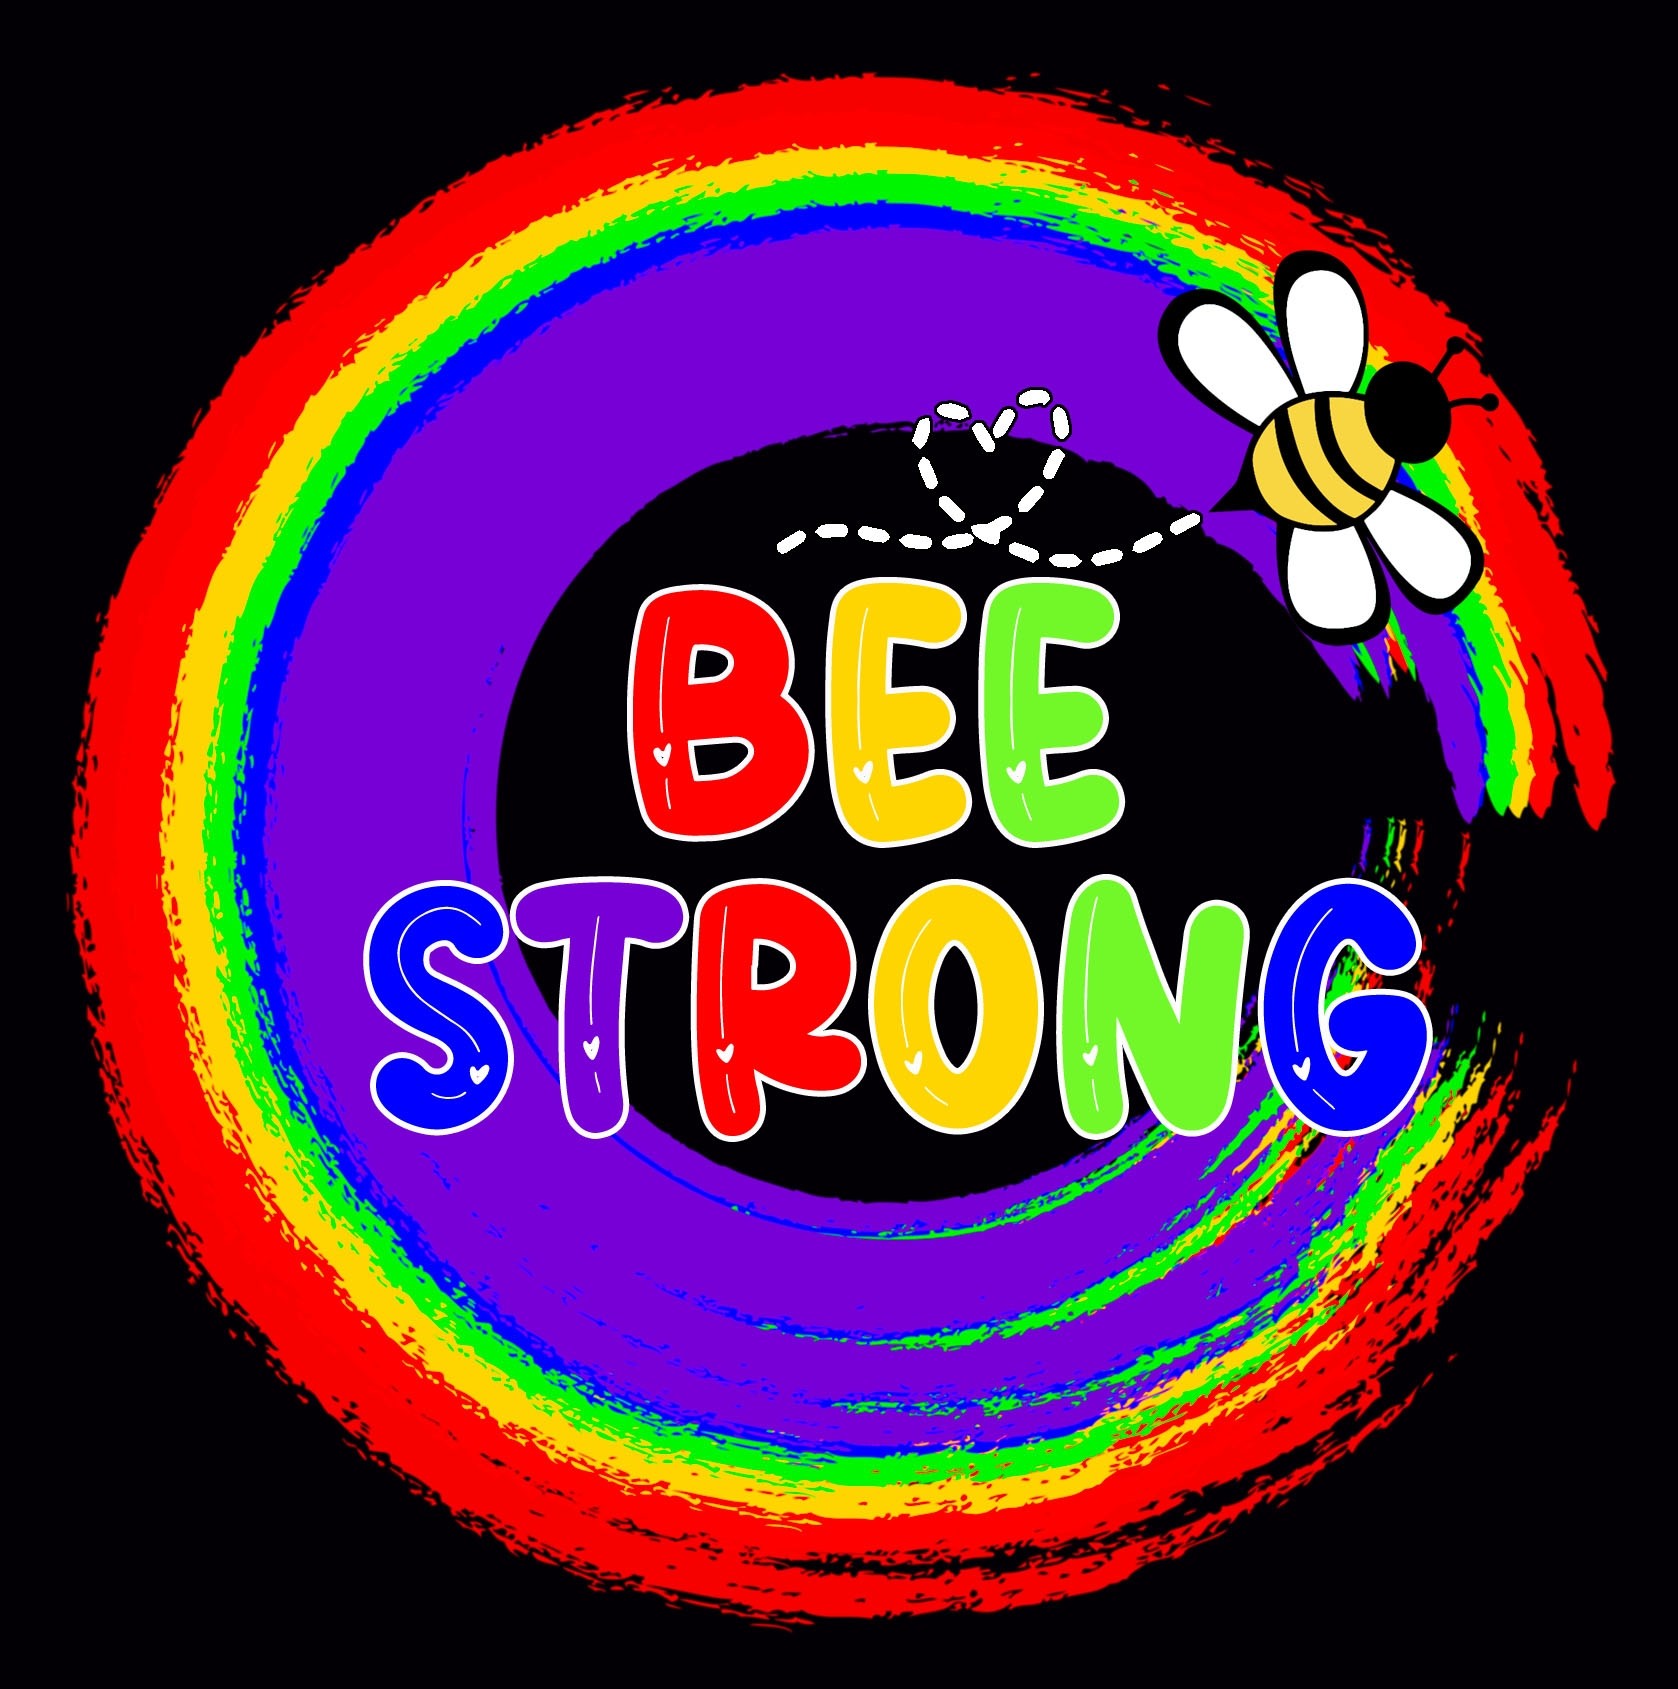 Inspirational Quote Pride Greeting Card - Bee Strong